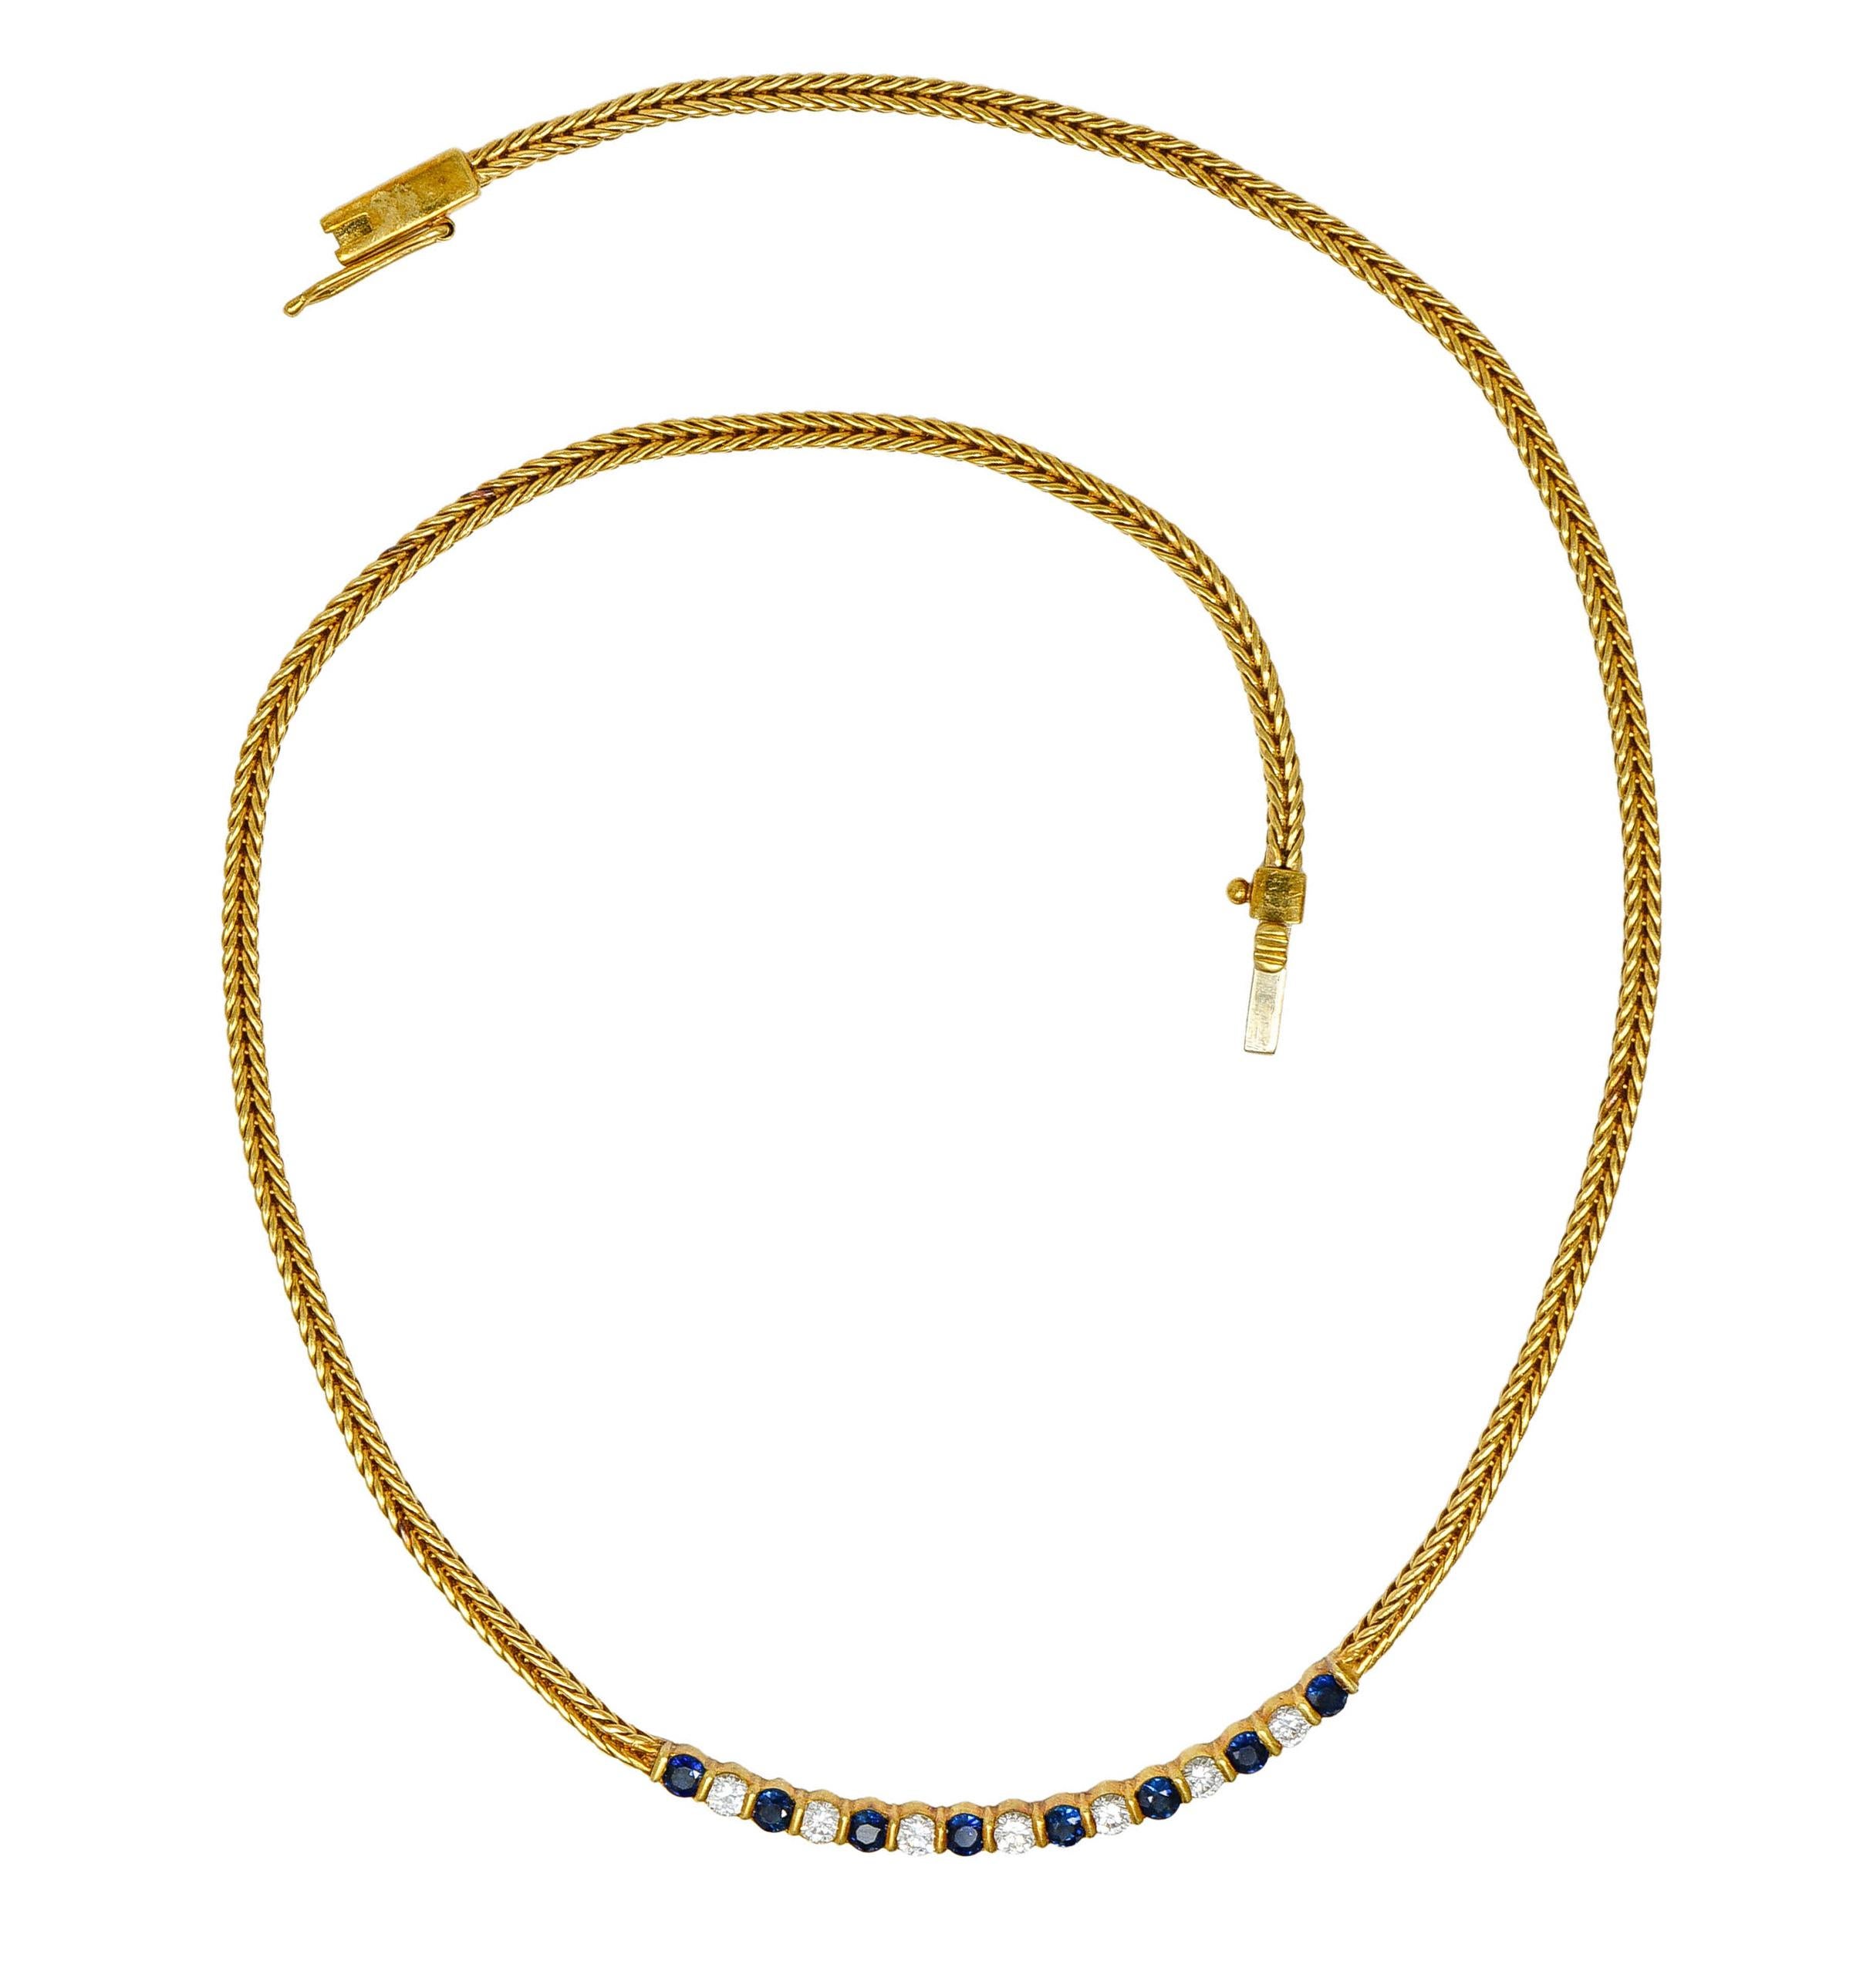 Necklace designed as a 3.0 mm finely braided wheat chain necklace

With central bar station featuring round brilliant cut diamonds and round sapphires

Sapphires are well matched dark saturated blue in color weighing approximately 1.25